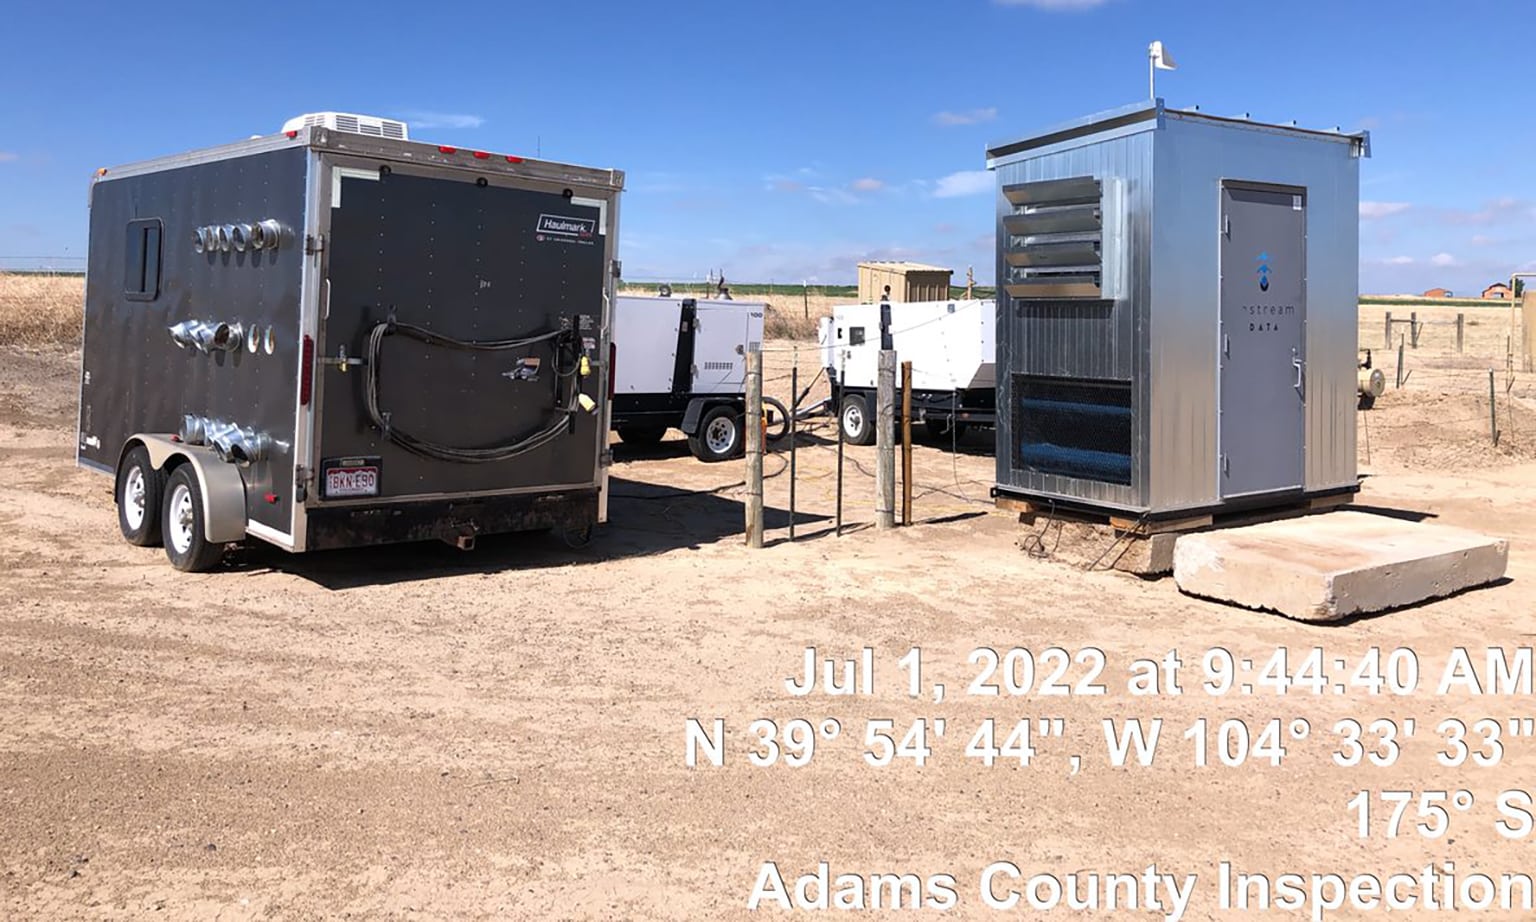 Crypto mining ends at gas well in Adams County